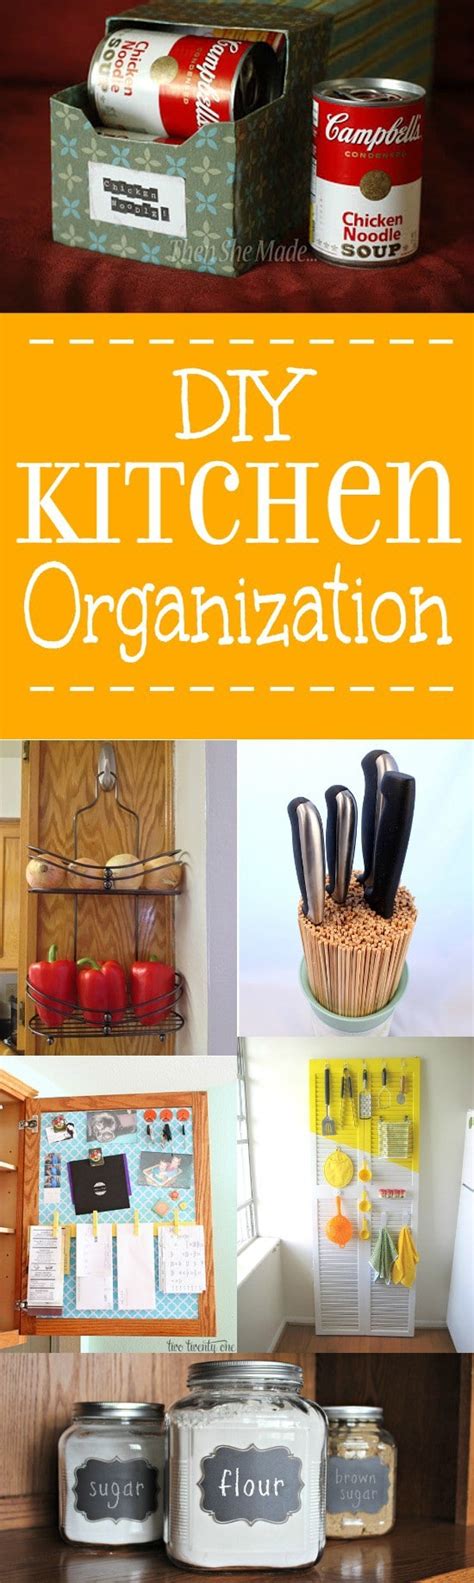 Every inch of kitchen space. 24 DIY Kitchen Organization Ideas | The Gracious Wife